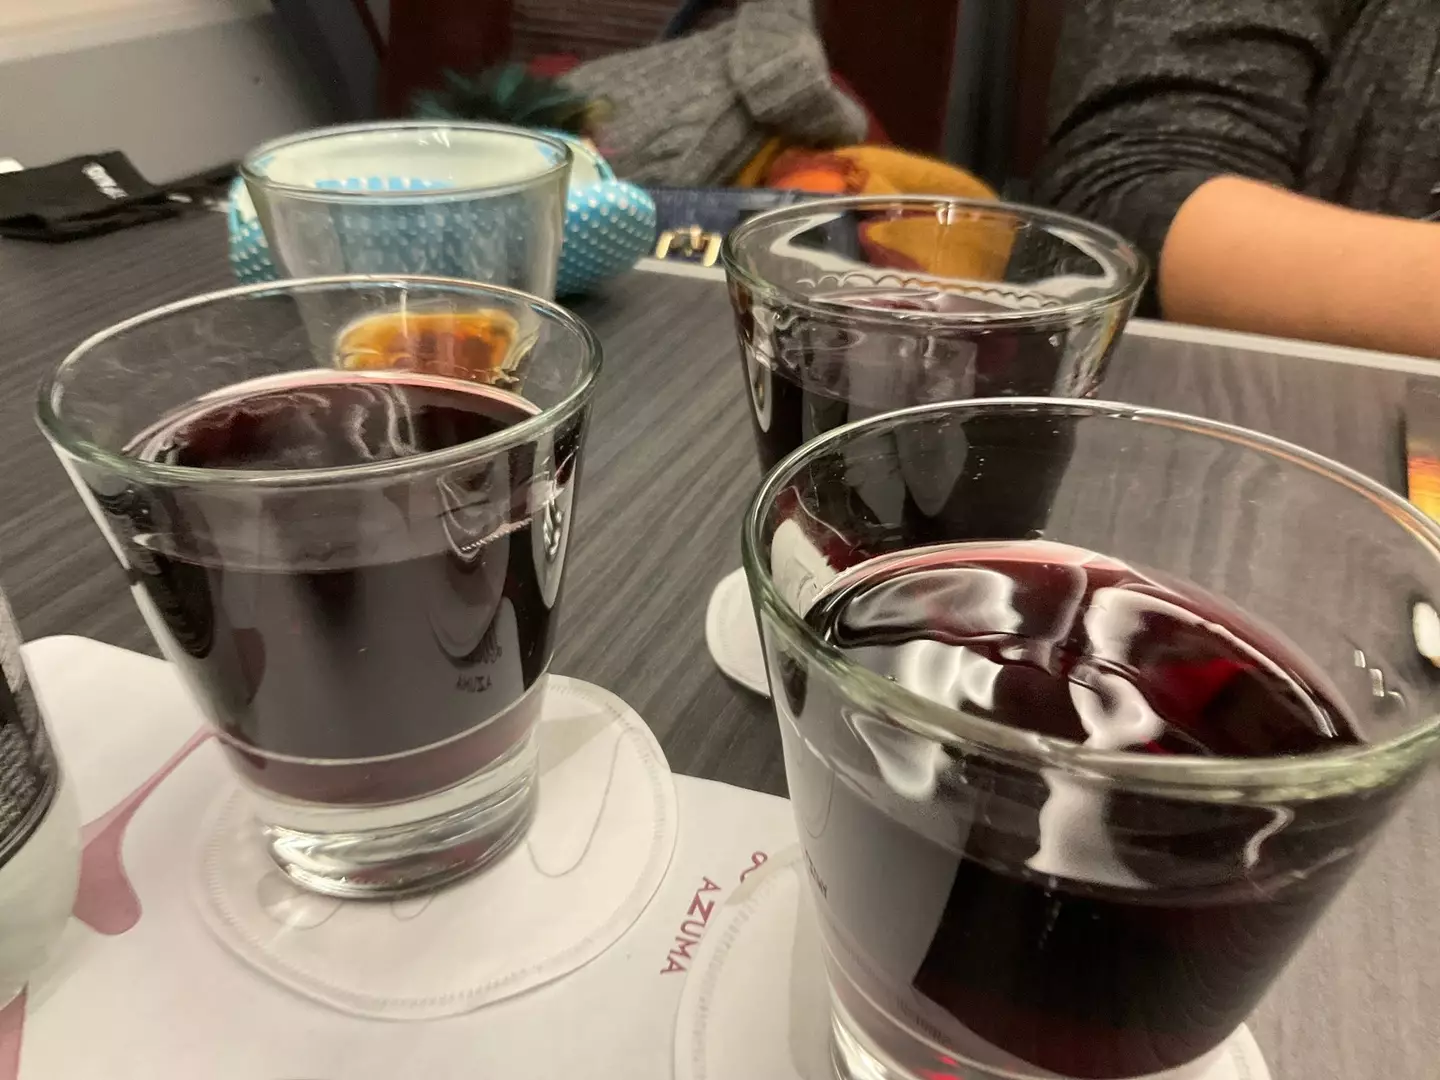 James later shared a picture of more wine.